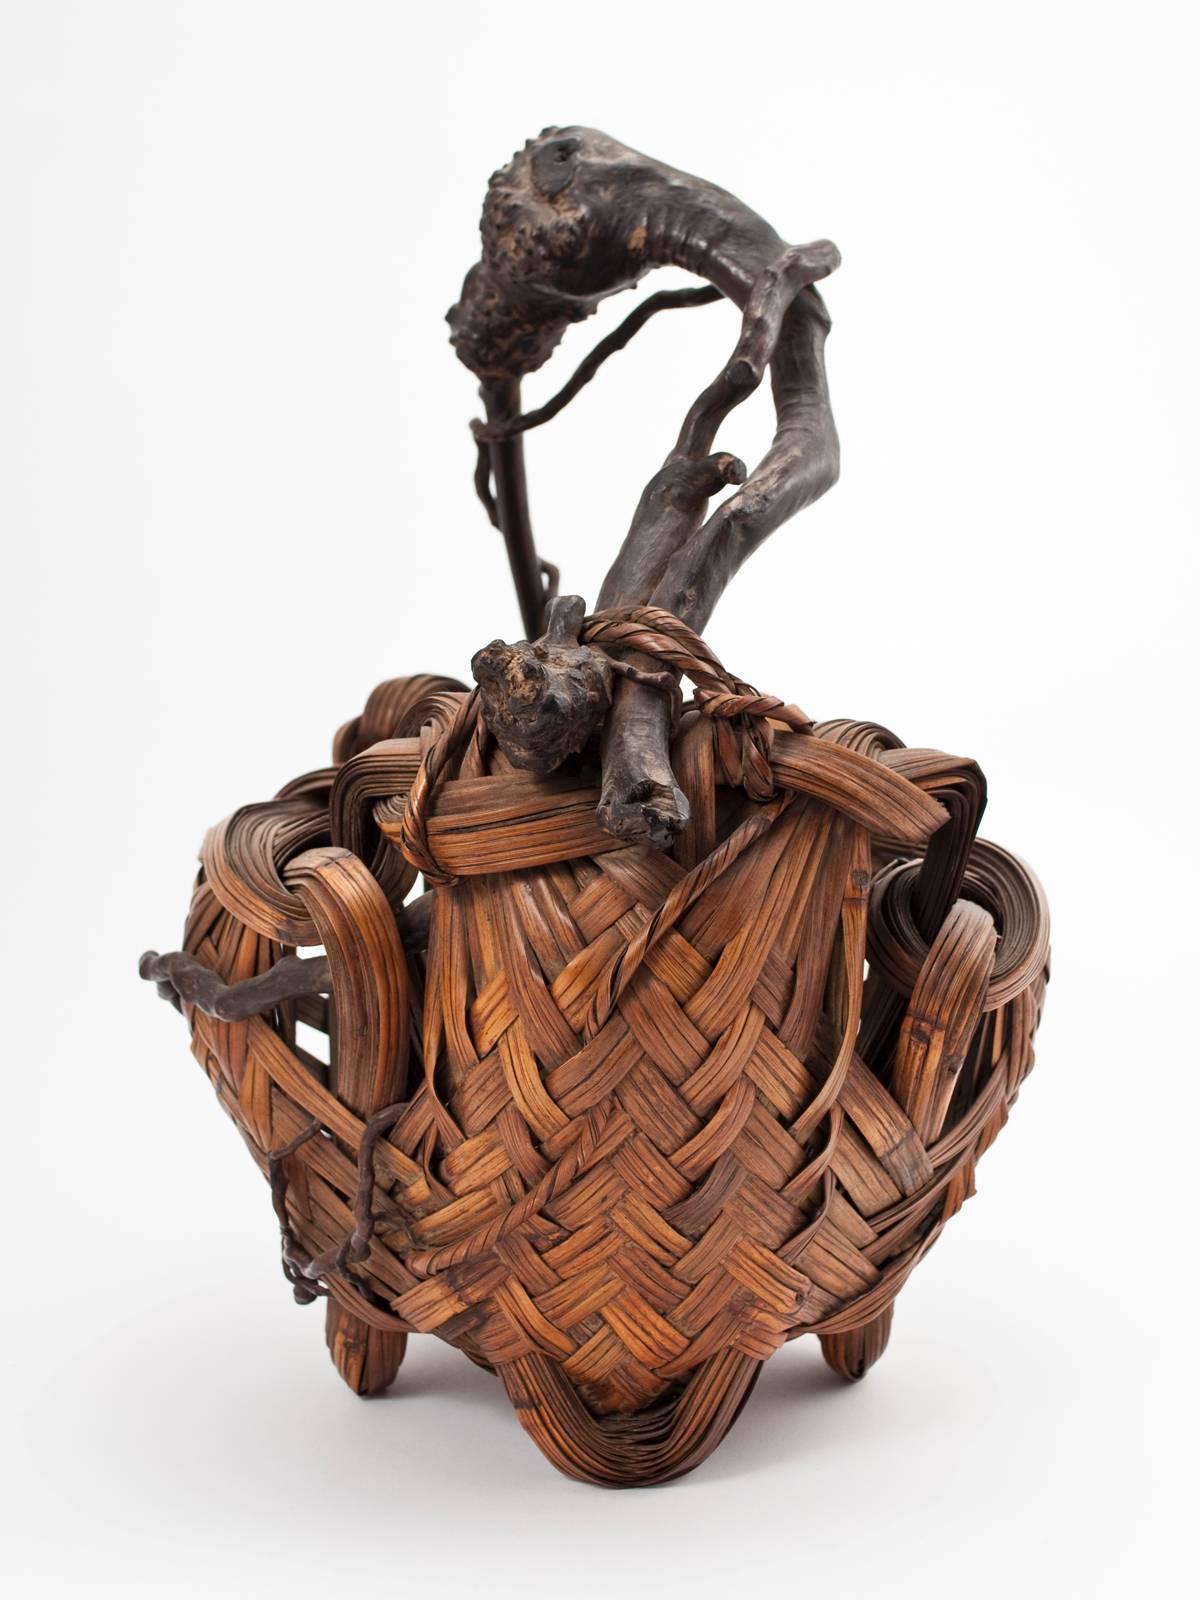 Offered by ZENA KRUZICK
Meiji Period Bamboo Ikebana Basket, Japan Made from Nemagaridake bamboo and vines.

Asymmetrical Japanese ikebana basket made of woven pieces of split Nemagaridake bamboo. The handle is made of twisting branches and vines,